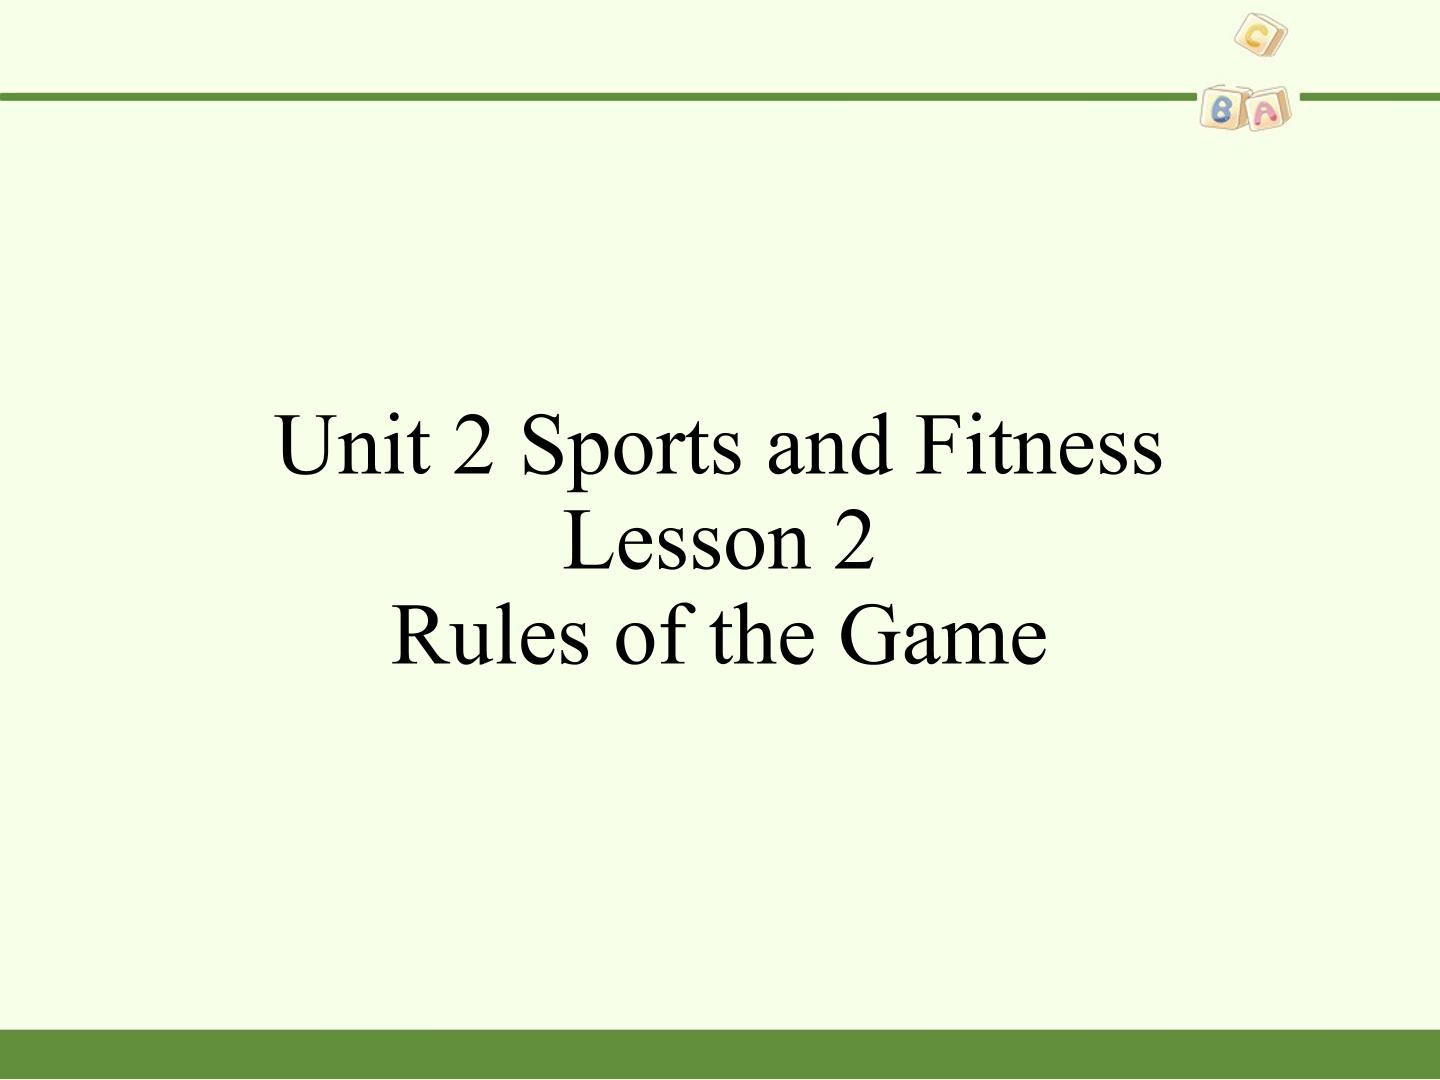 Lesson 2 Rules of the Game